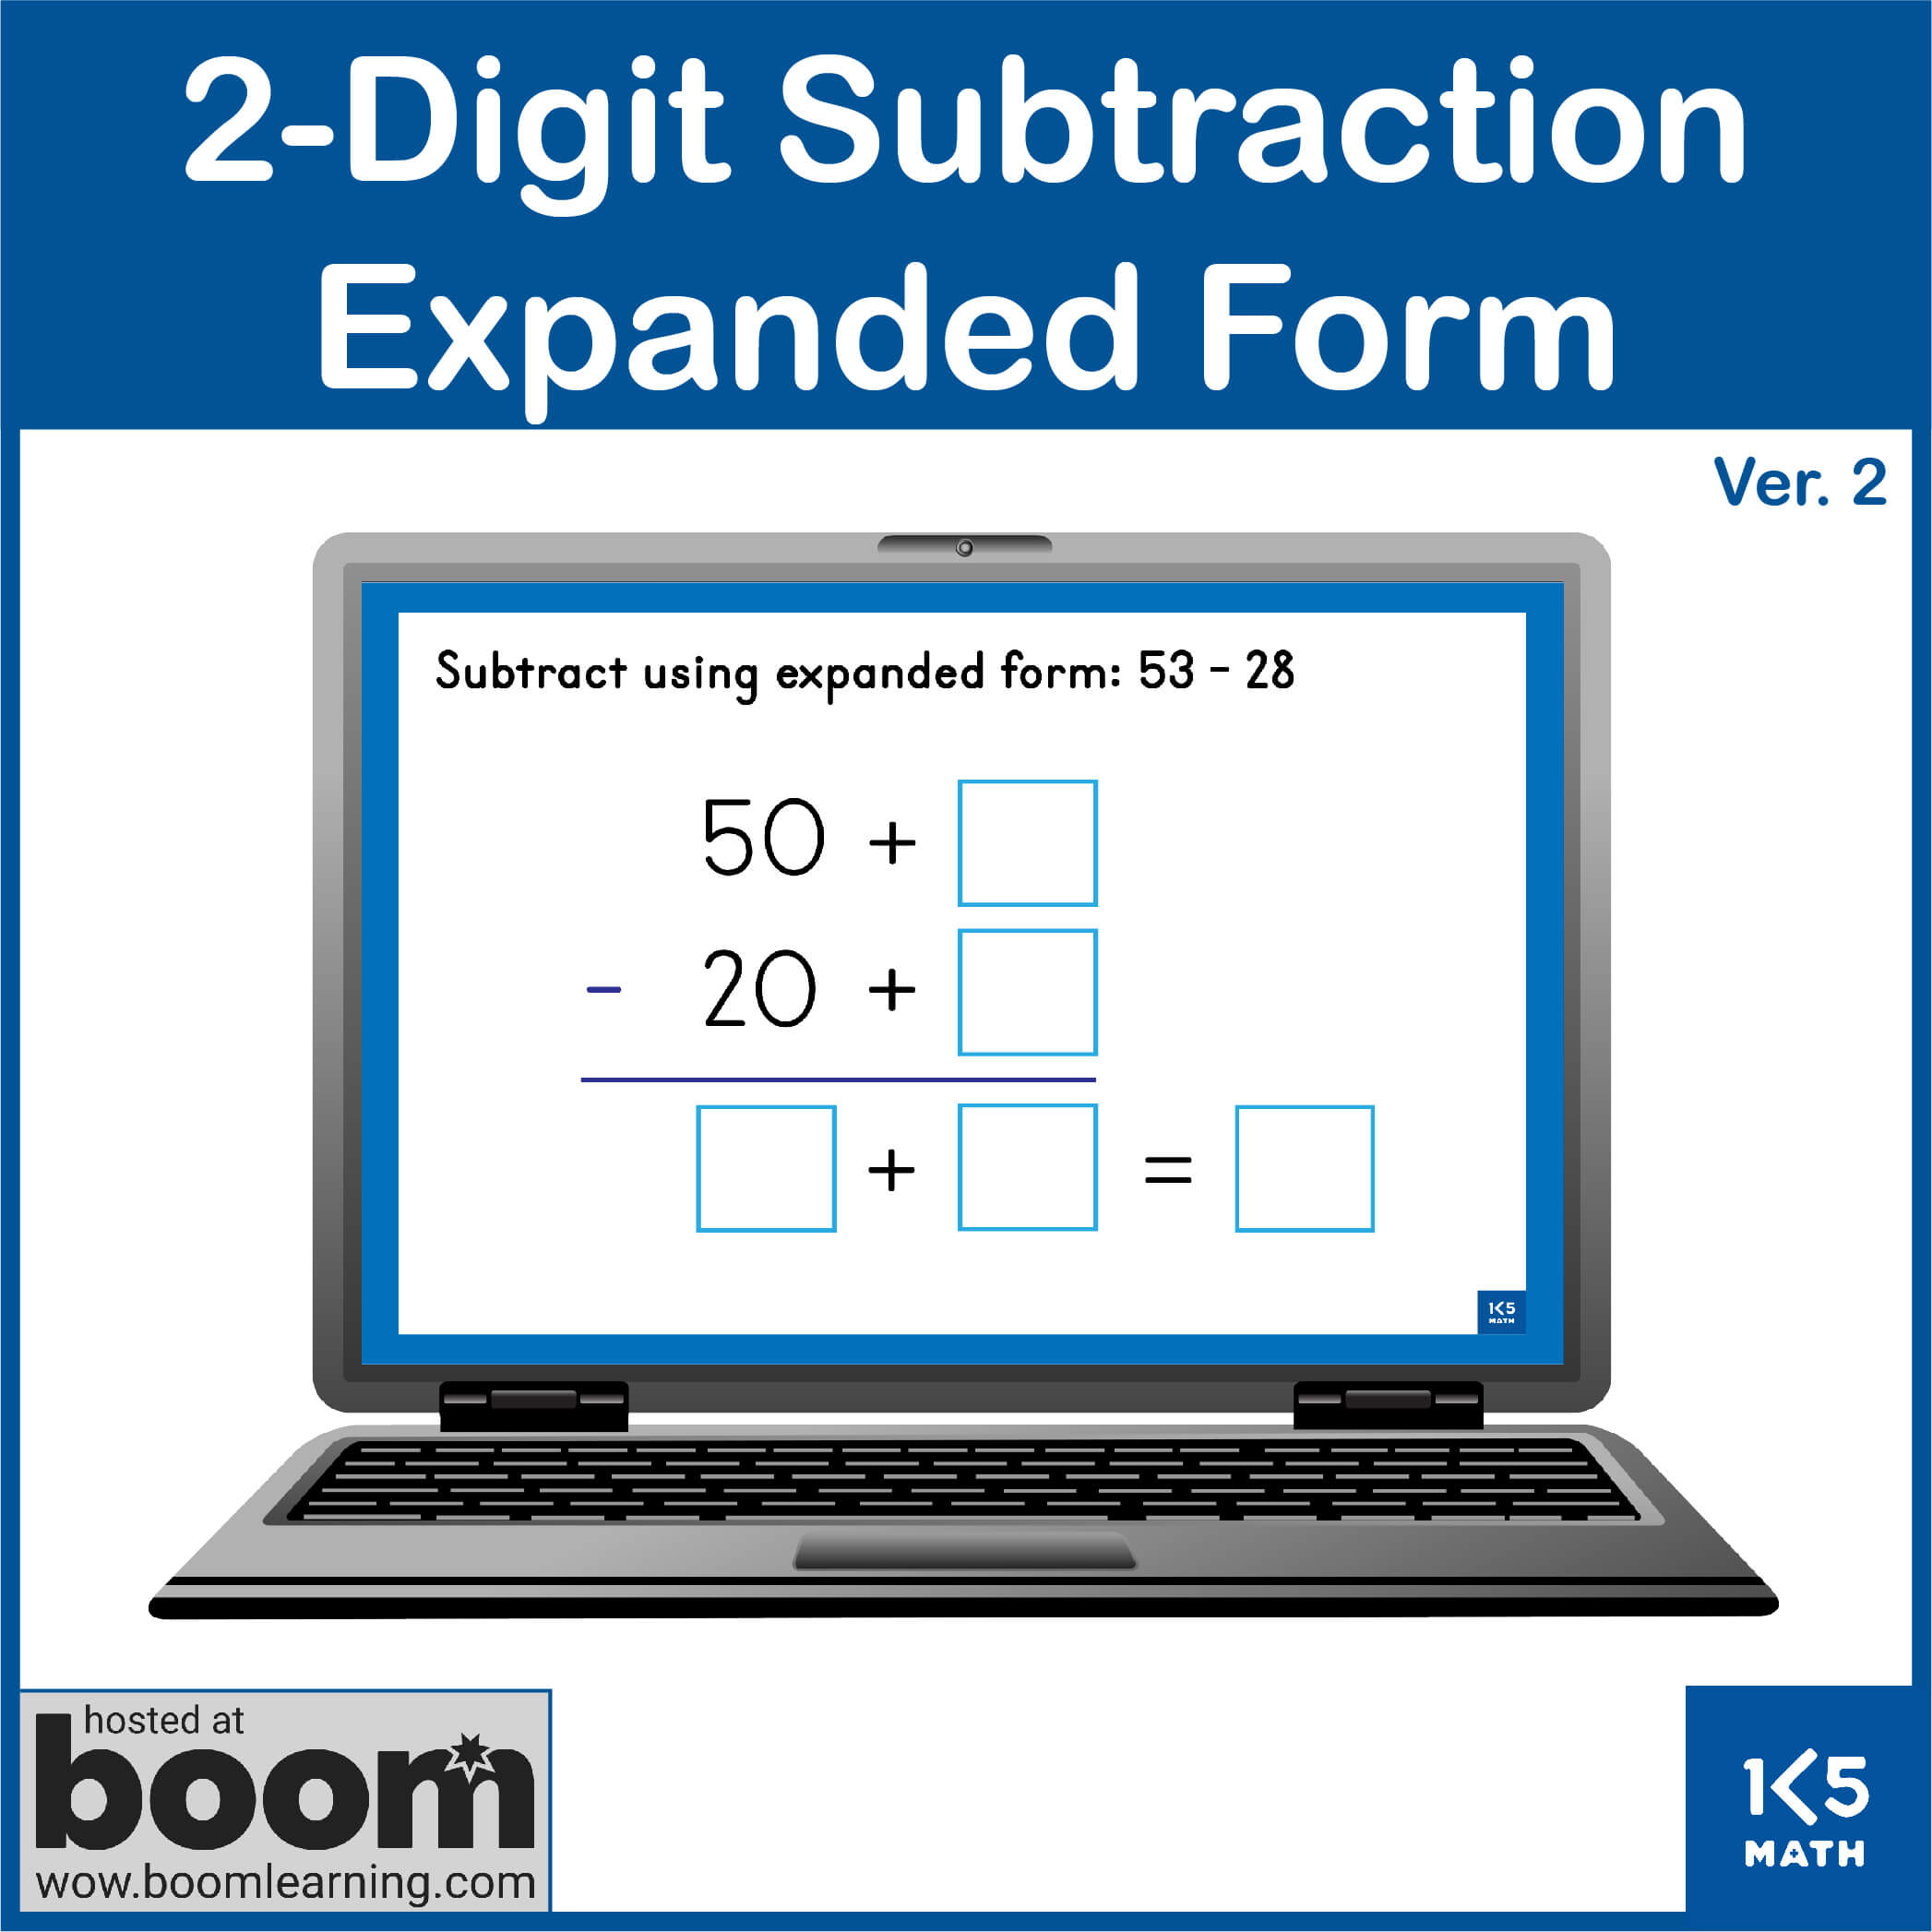 Boom Cards: 2-Digit Subtraction Expanded Form (with regrouping)